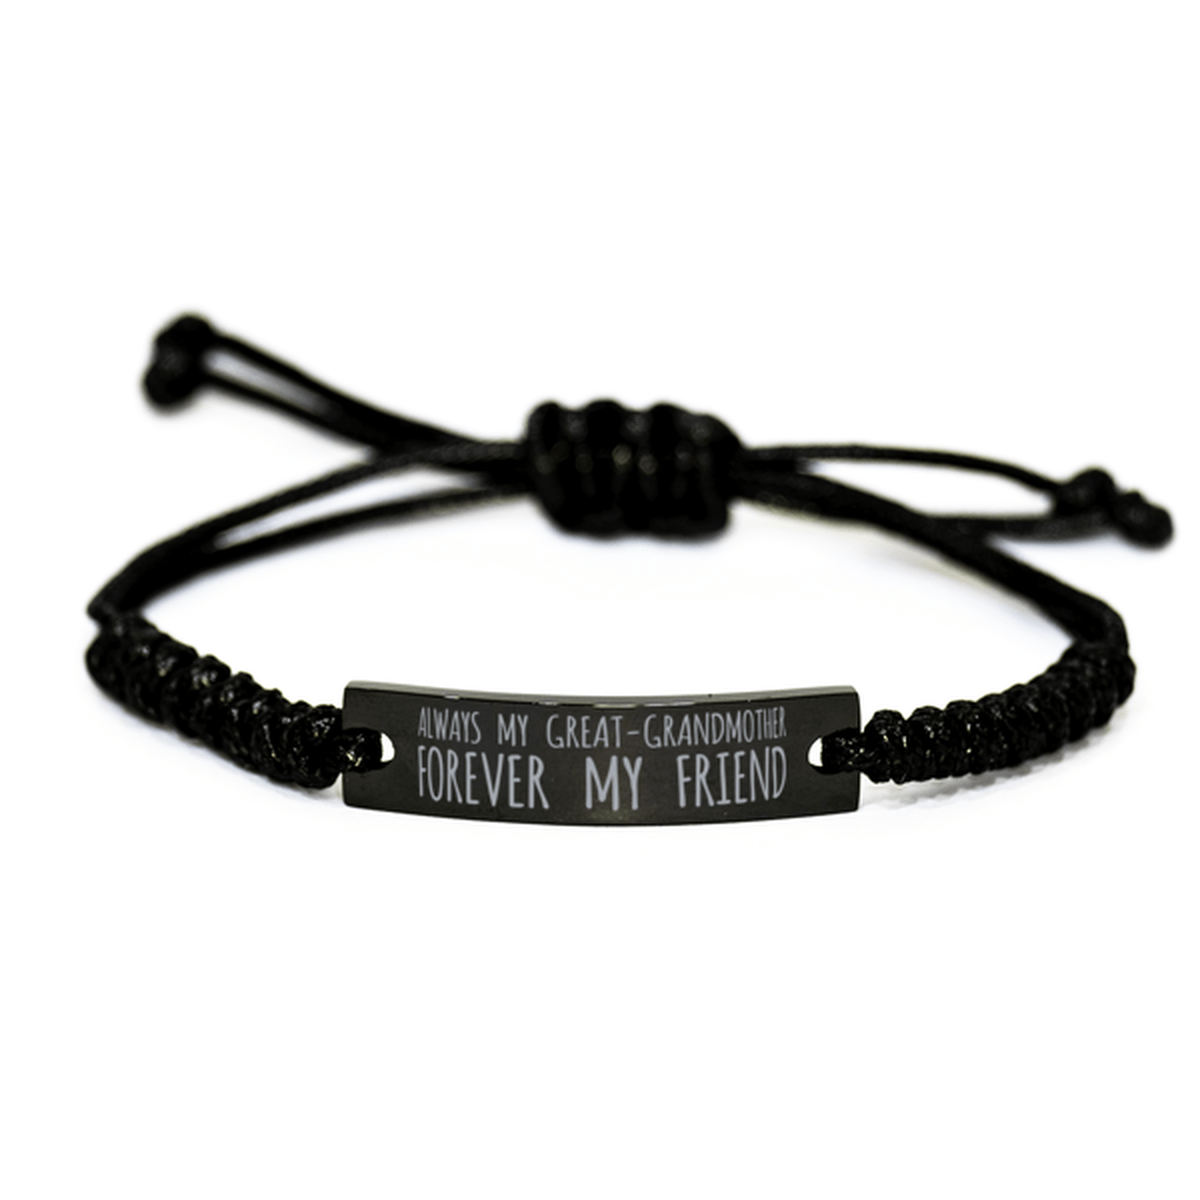 Inspirational Great Grandmother Black Rope Bracelet, Always My Great Grandmother Forever My Friend, Best Birthday Gifts For Family